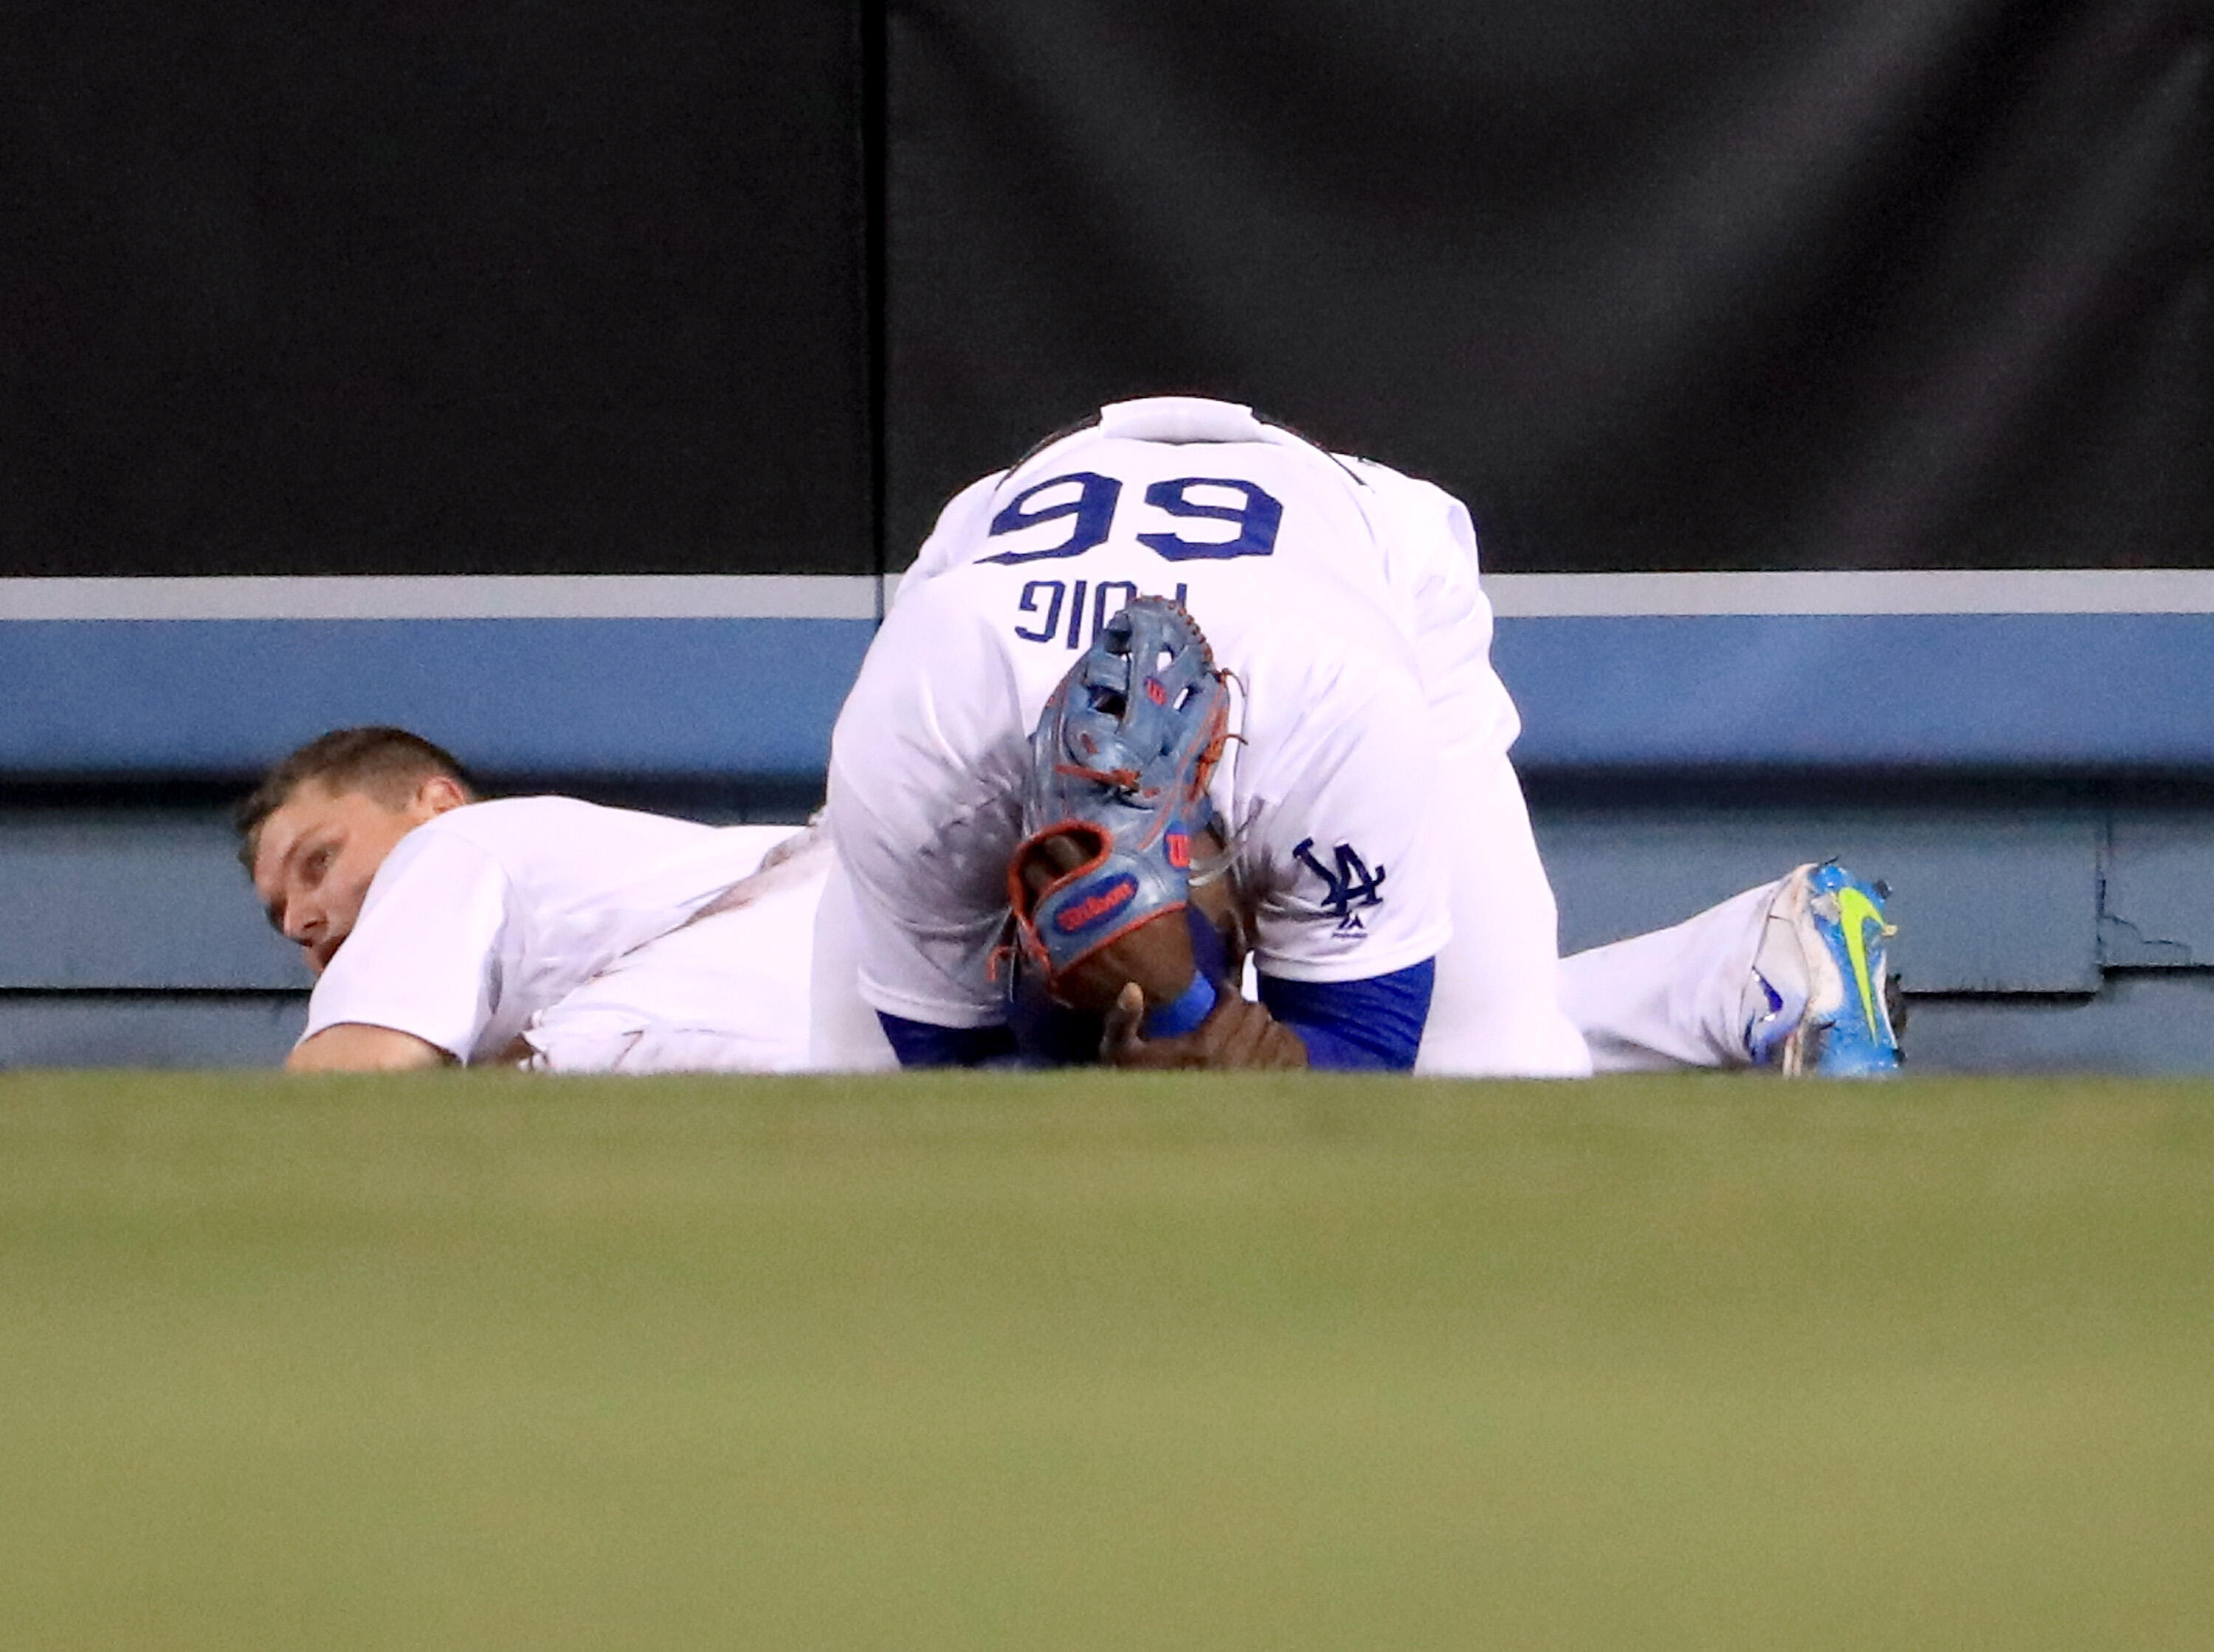 LOS ANGELES, CA - MAY 23:  Yasiel Puig #66 of the Los Angeles Dodgers reacts after colliding with Joc Pederson #31 after his catch for an out of Yadier Molina #4 of the St. Louis Cardinals to end the tenth inning at Dodger Stadium on May 23, 2017 in Los A